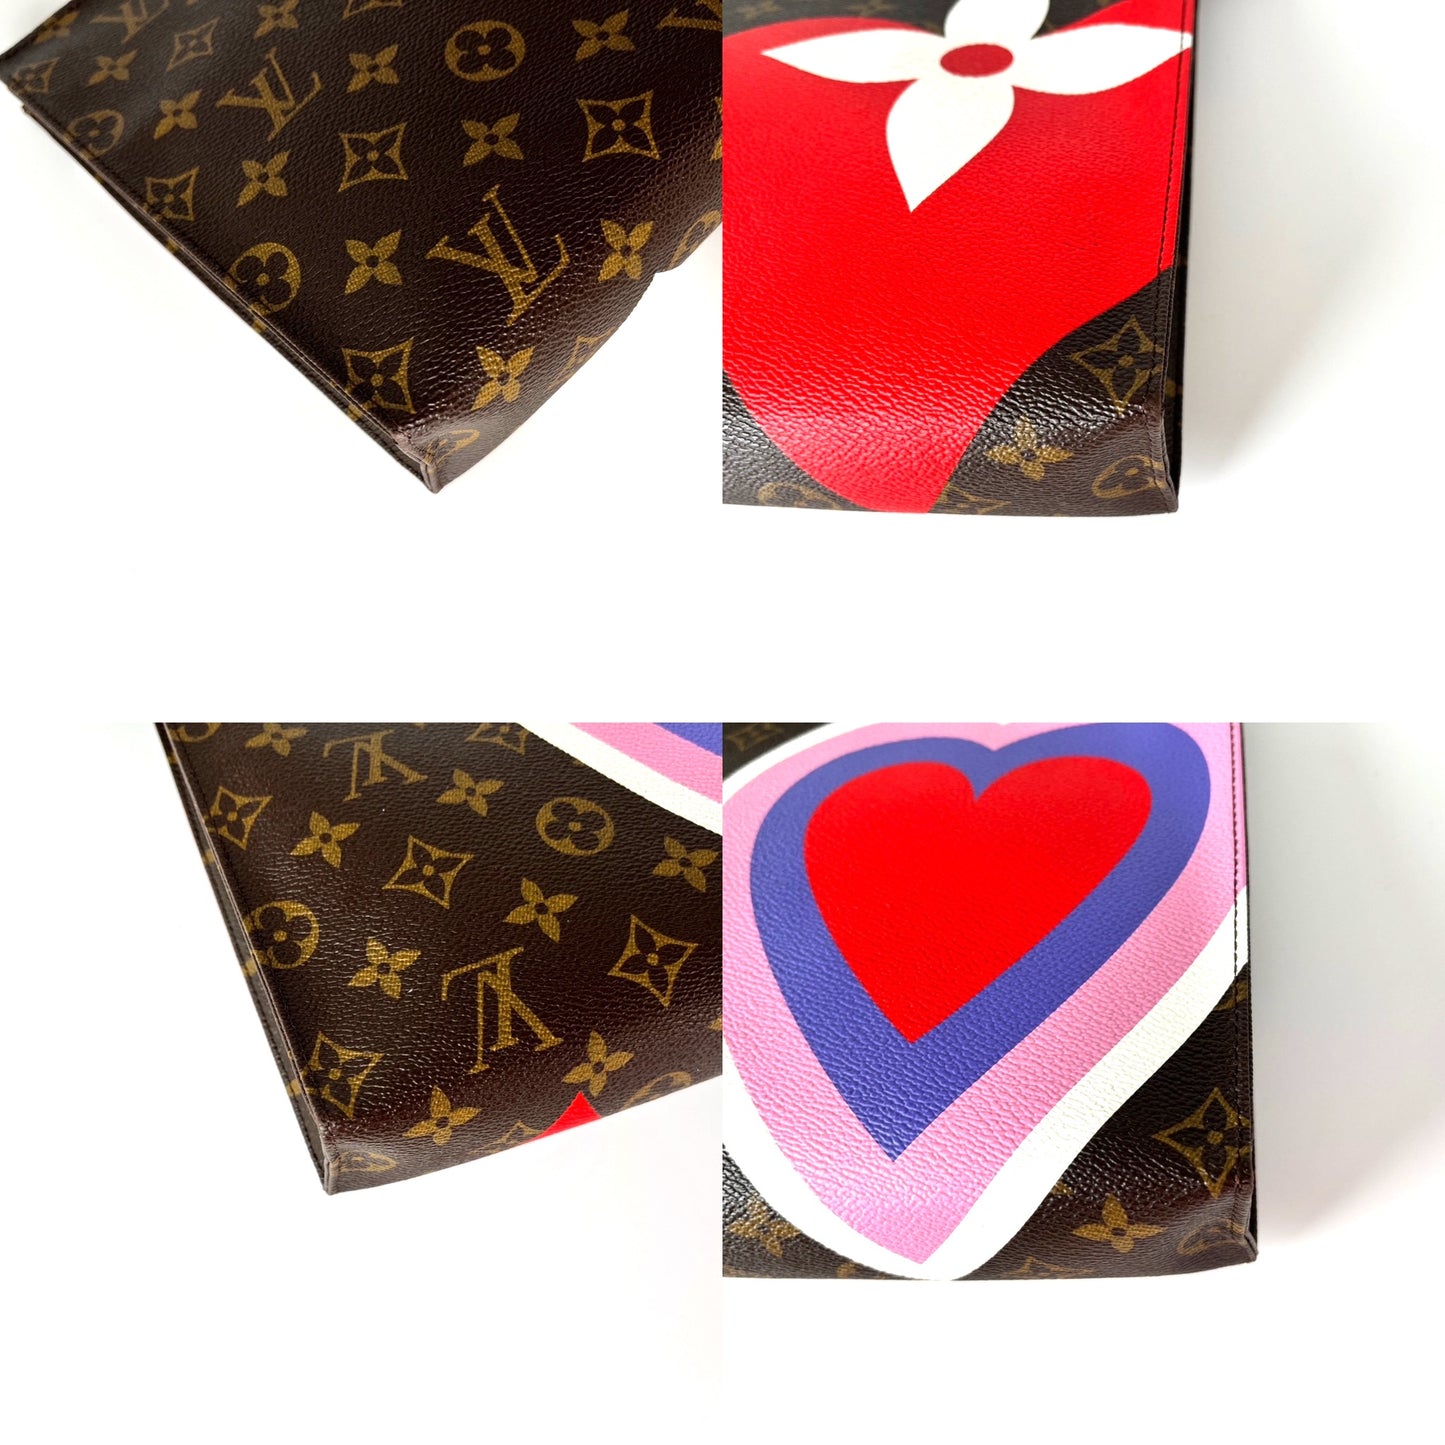 LOUIS VUITTON Monogram 2021 Game On Zip Brown Toiletry Heart Pouch Bag 26